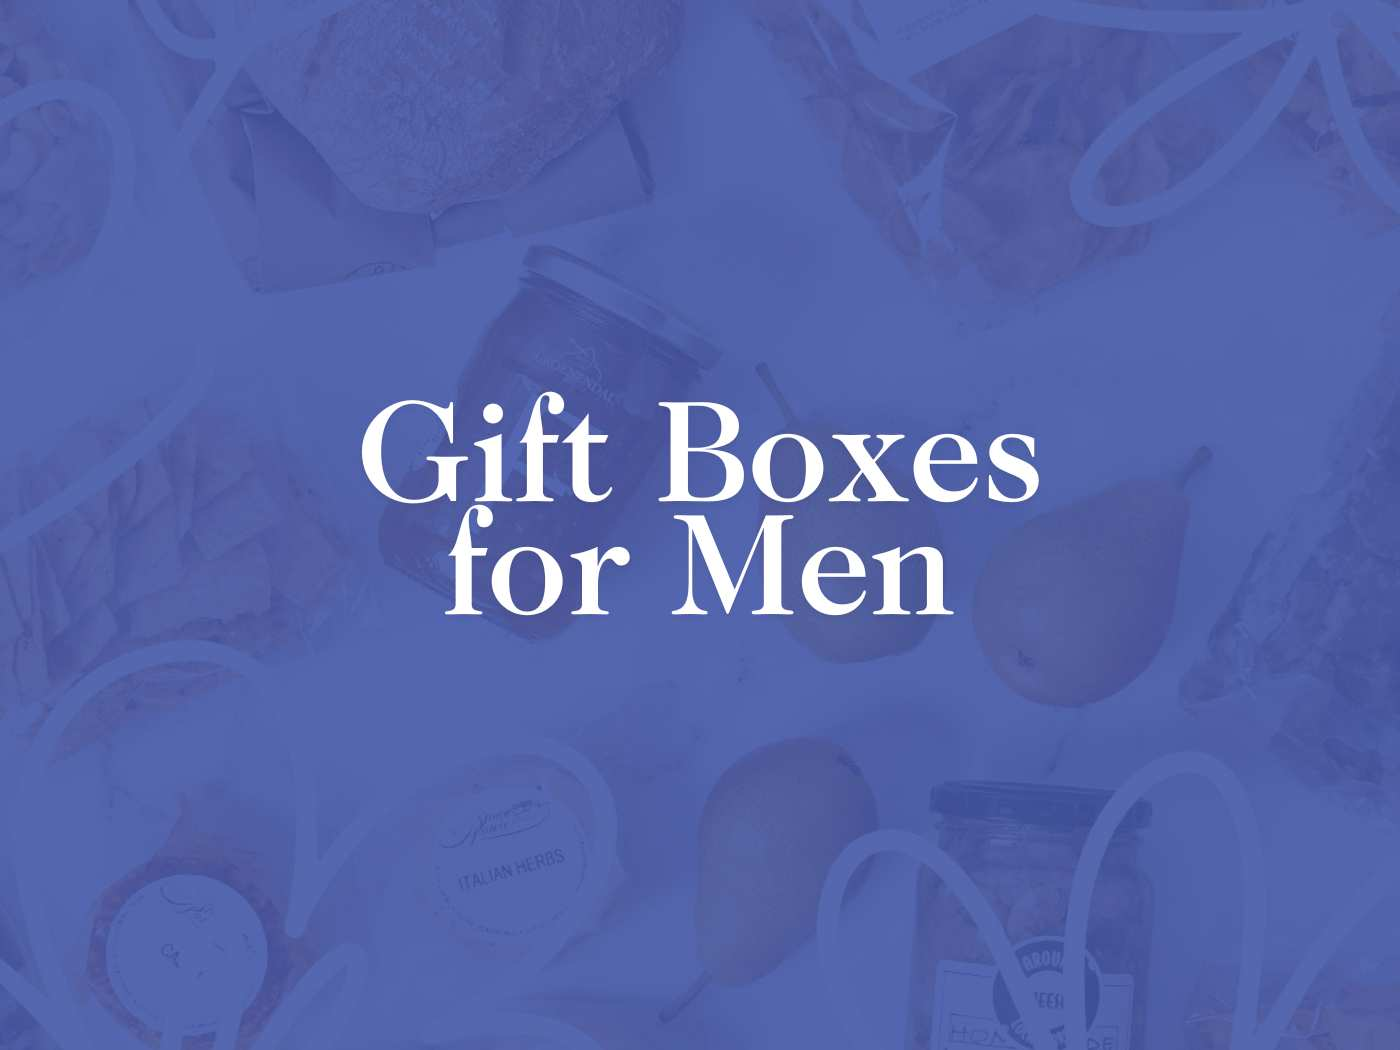 An assortment of gift hampers and treats, representing the Gift Boxes for Men Collection - Special gifts that add great value and loved by Amazon reviewers - Fabulous Flowers and Gifts